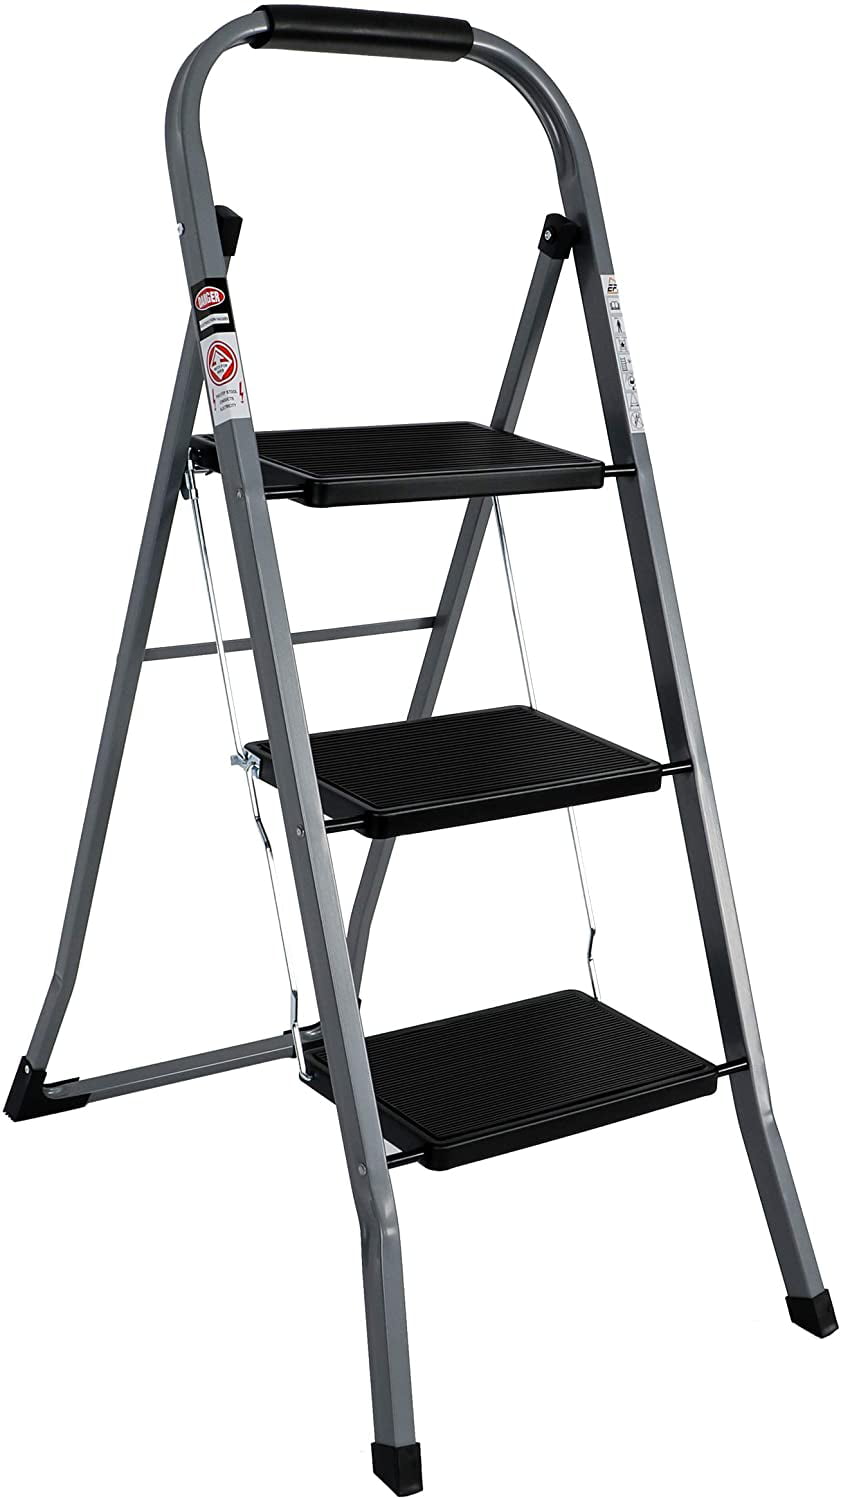 Holding up to 330lbs. Slim Folding Design Step Stool Gray Sturdy and Lightwight High Grade Steel with Smooth Powder Coating EFINE 4 Step Ladder 